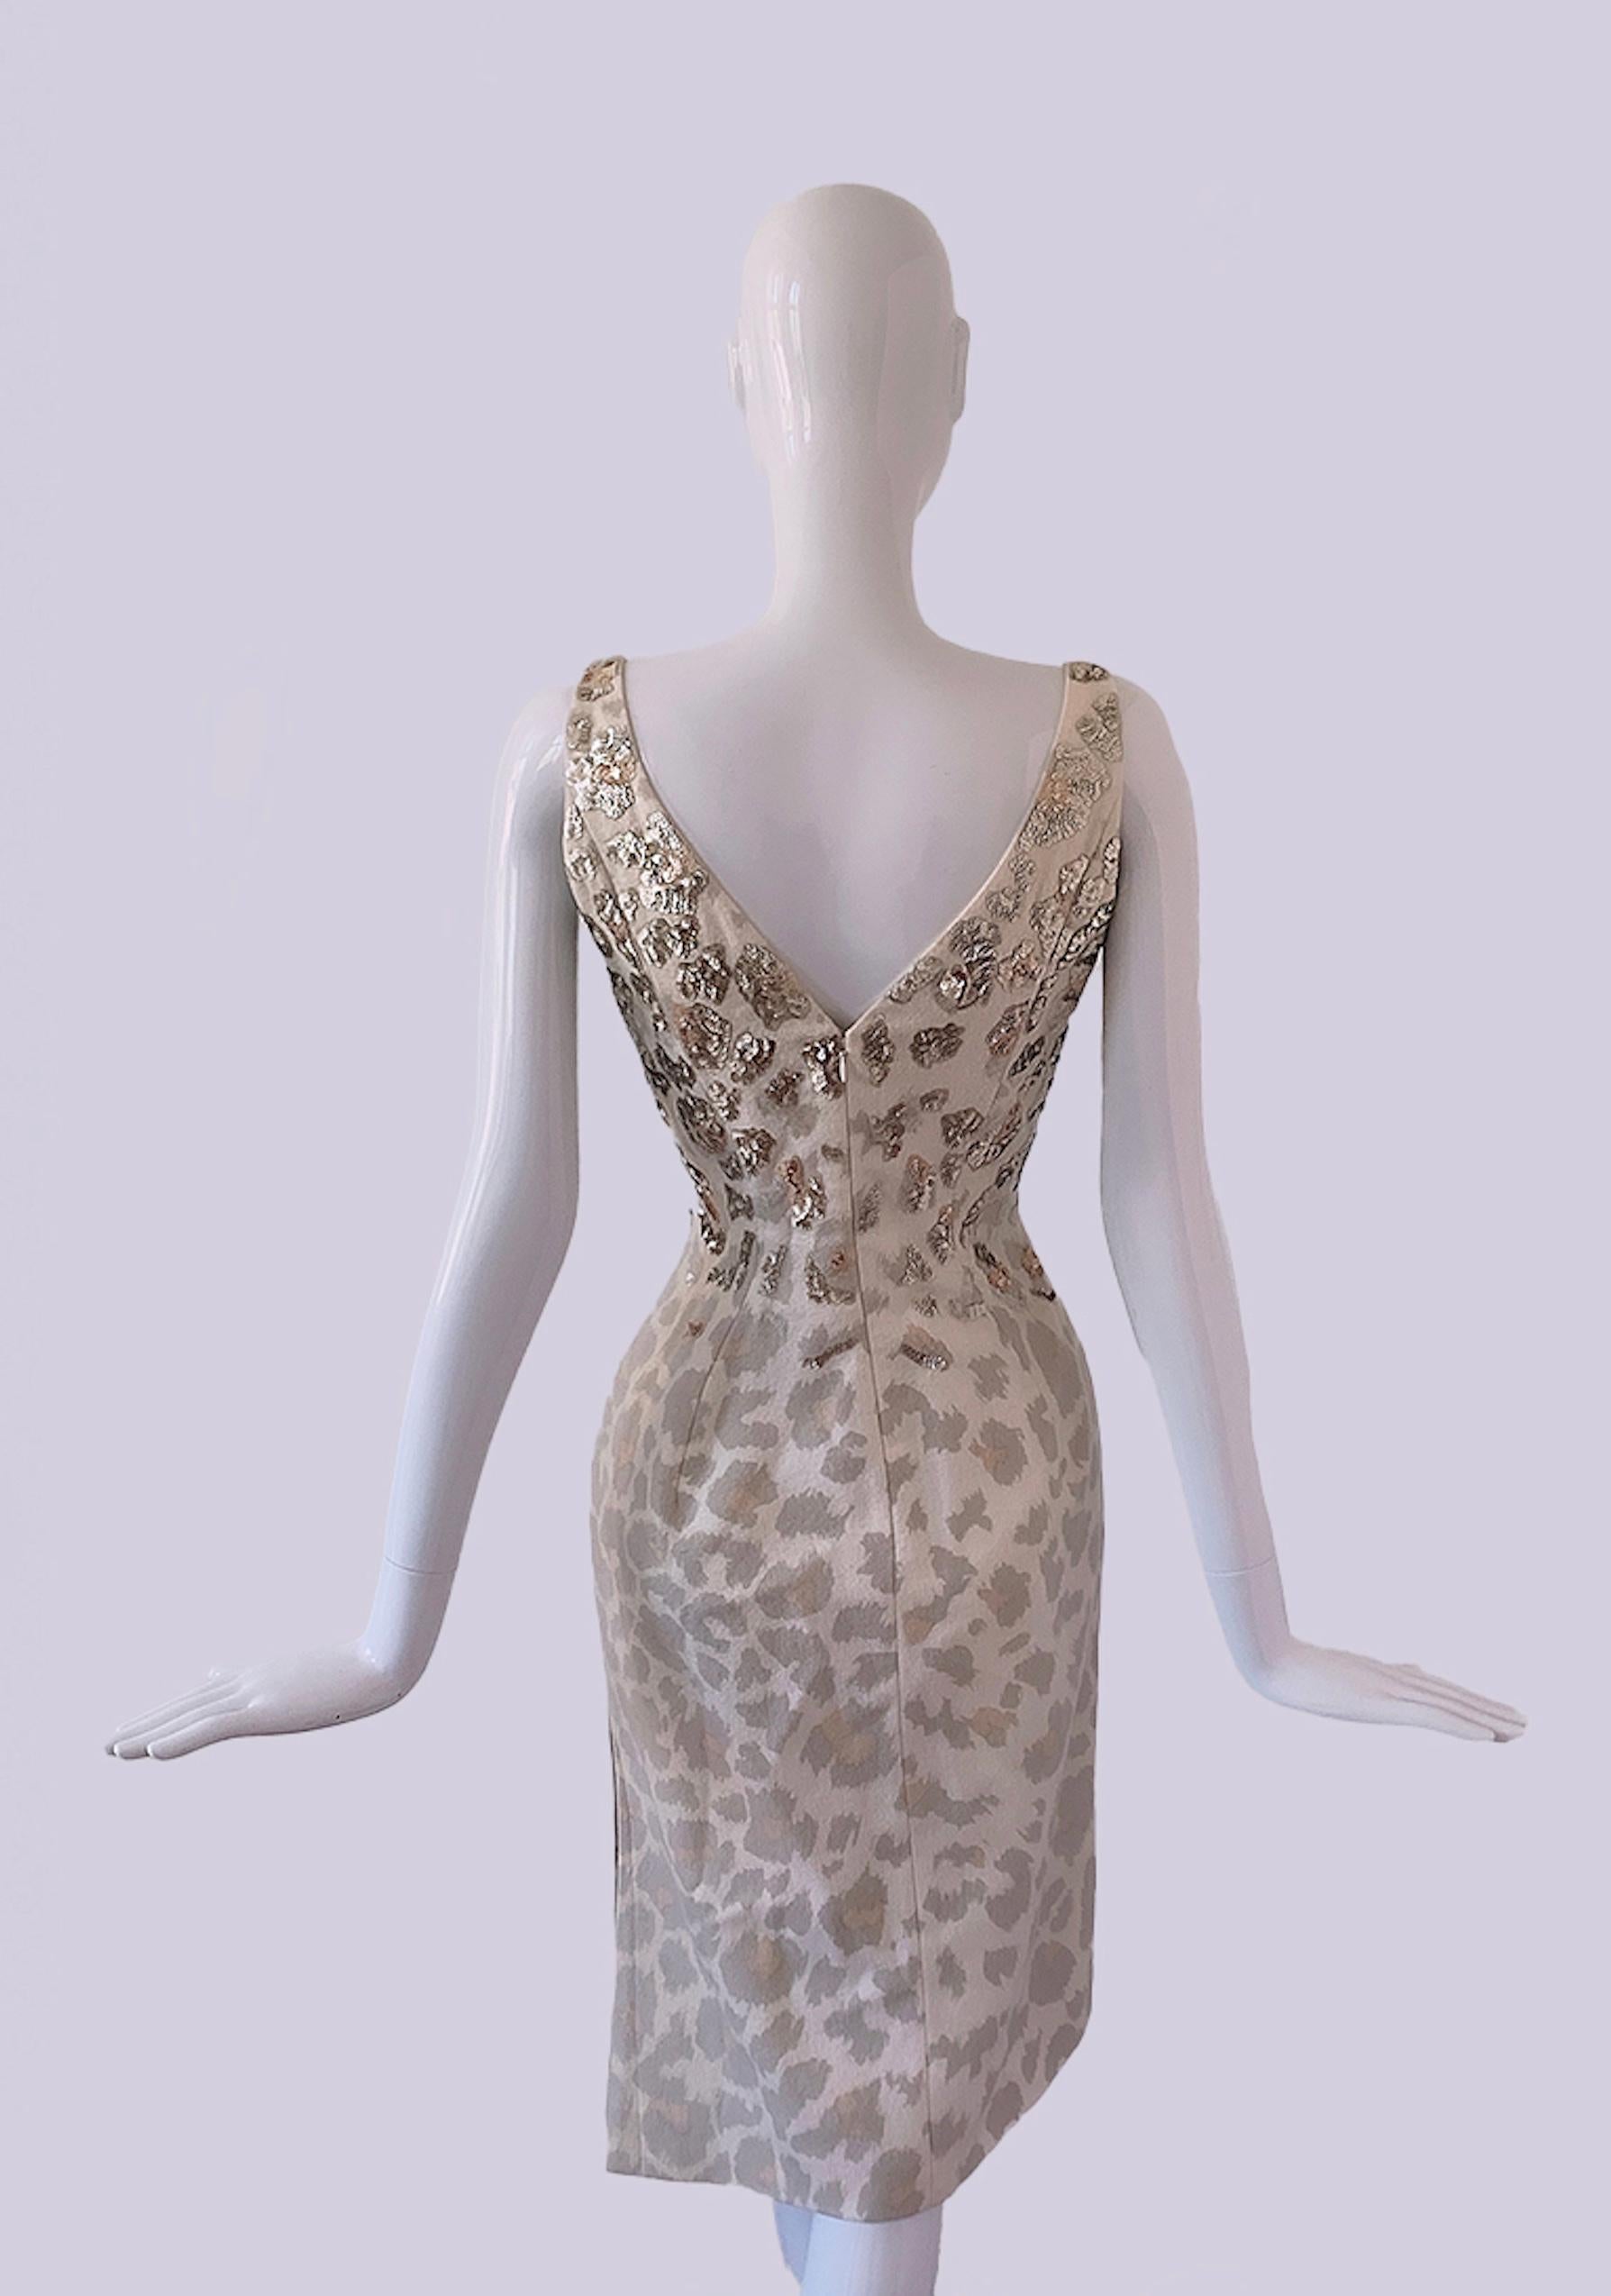 Women's Iconic Thierry Mugler Couture FW 2001 Leo Runway Dress Rare For Sale